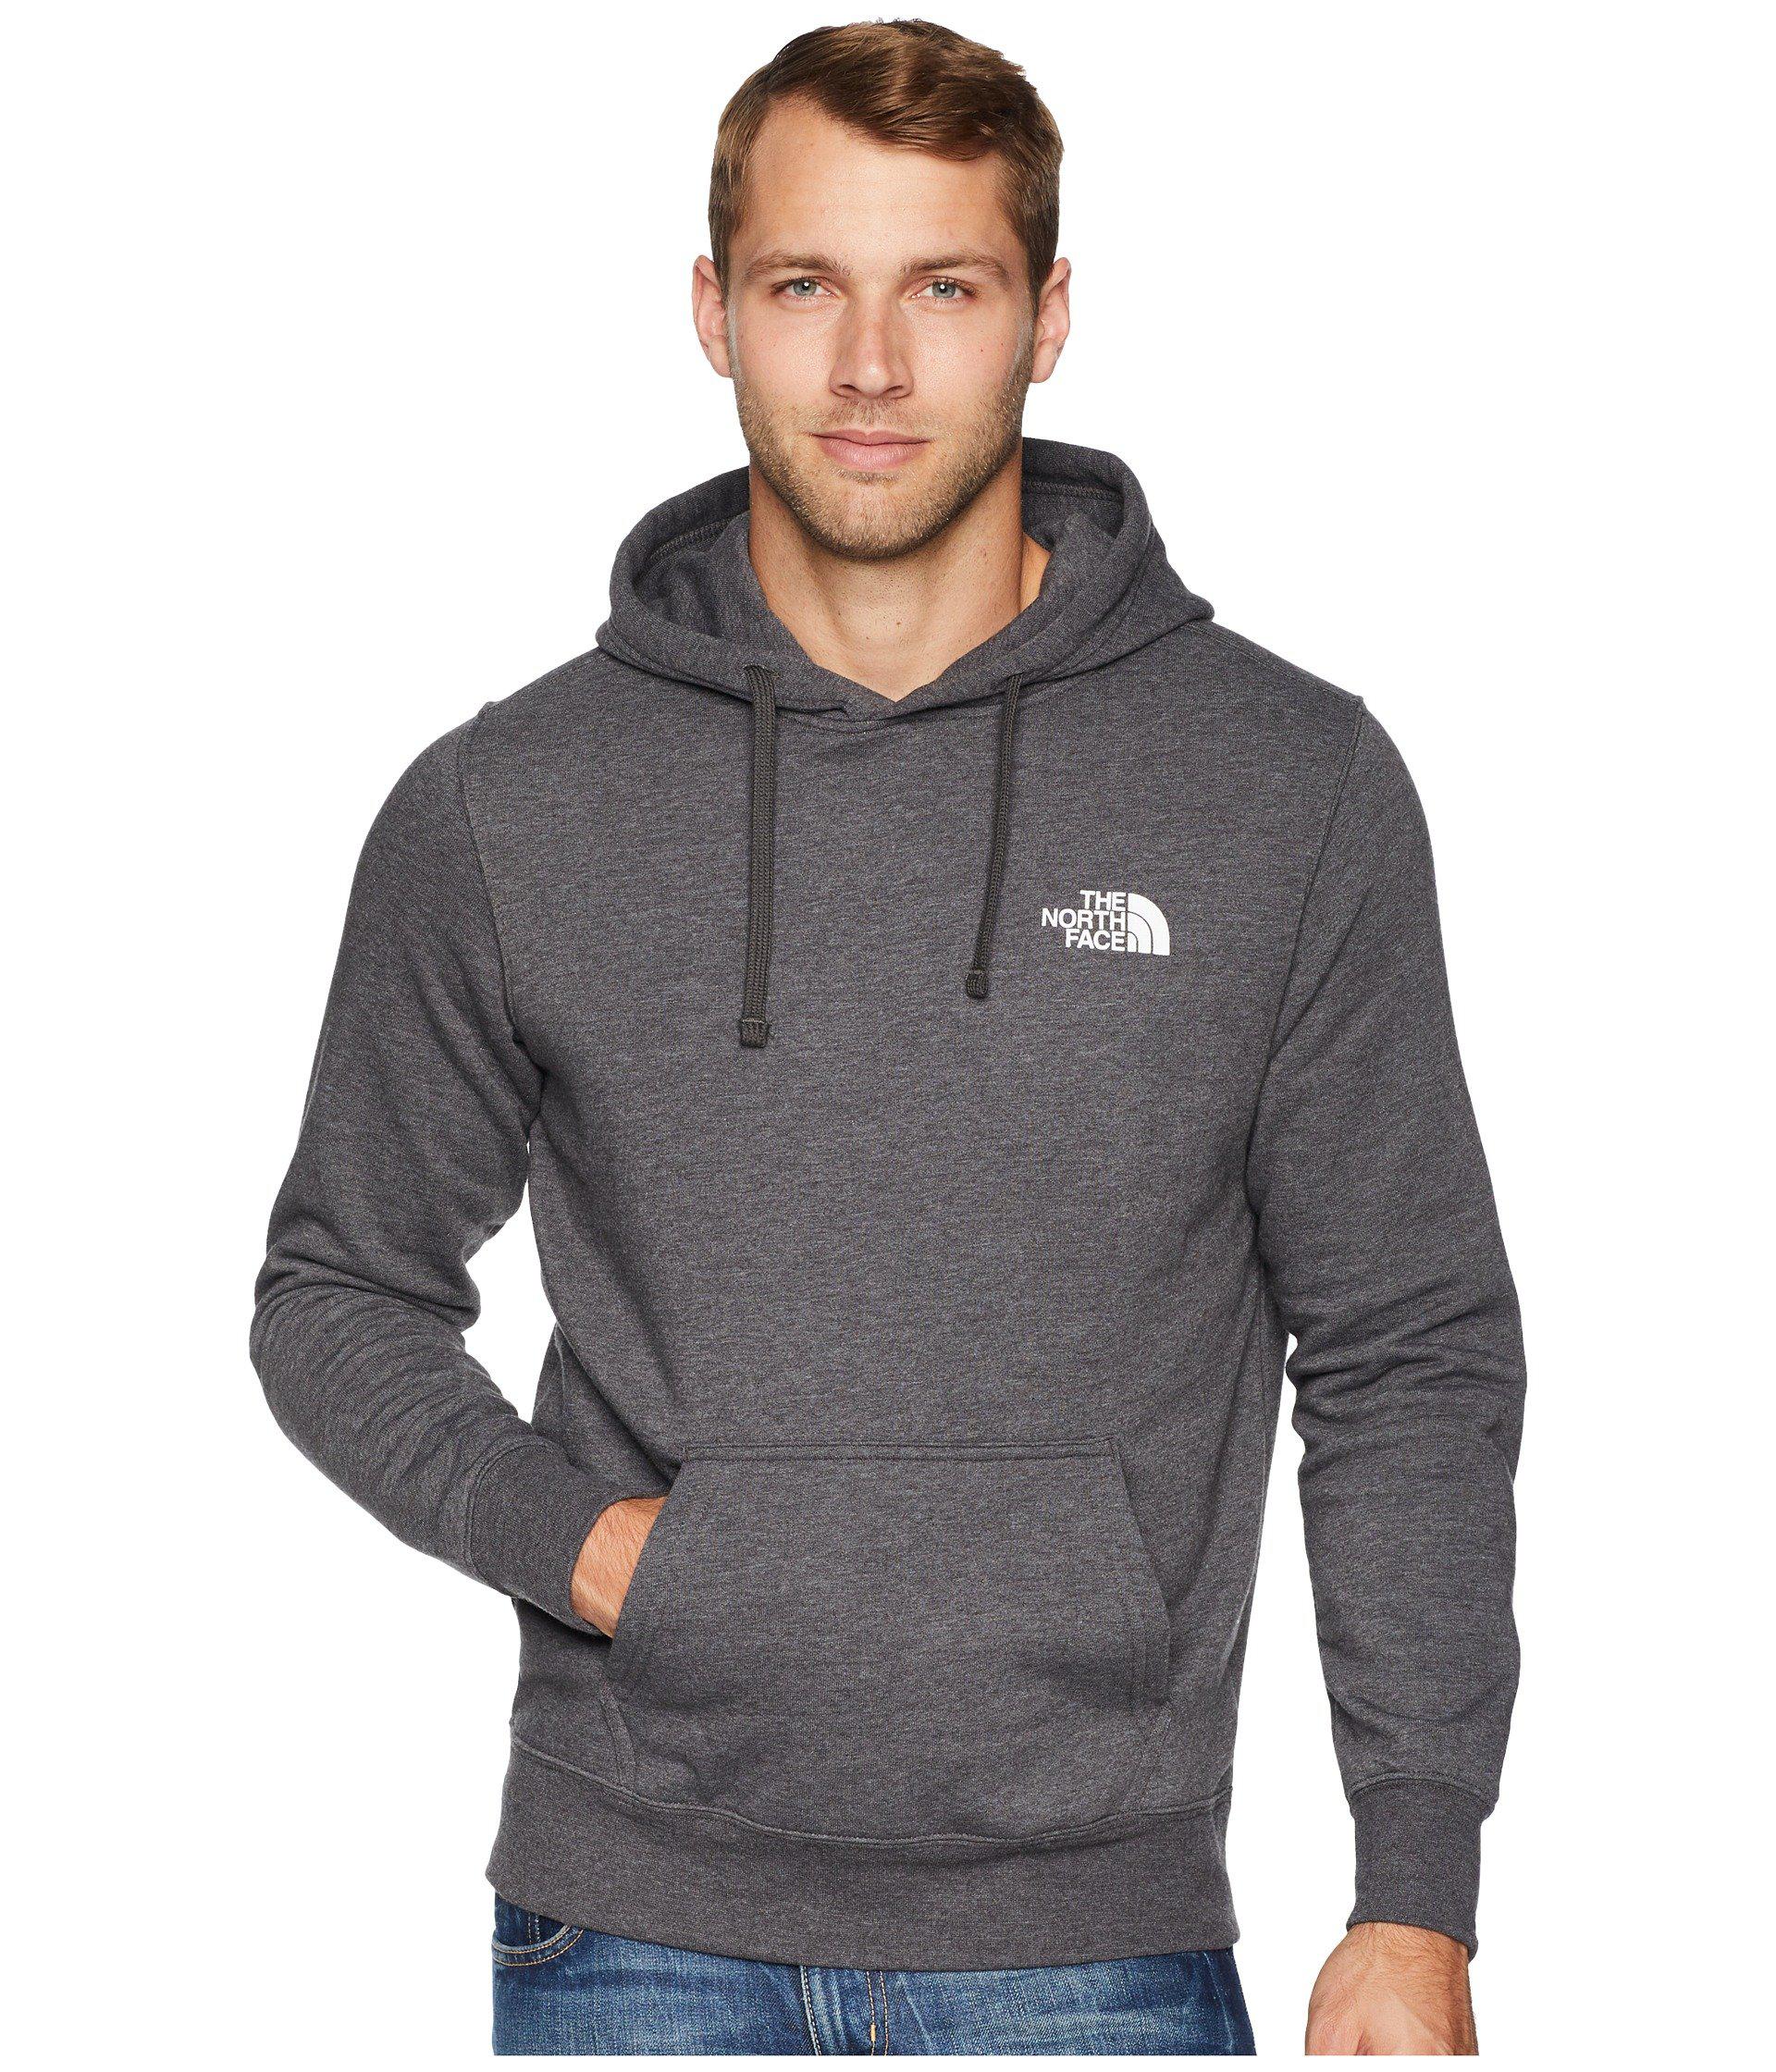 The North Face Cotton Red Box Pullover Hoodie Tnf Light Grey Heather Everglade Men S Sweatshirt In Gray For Men Lyst